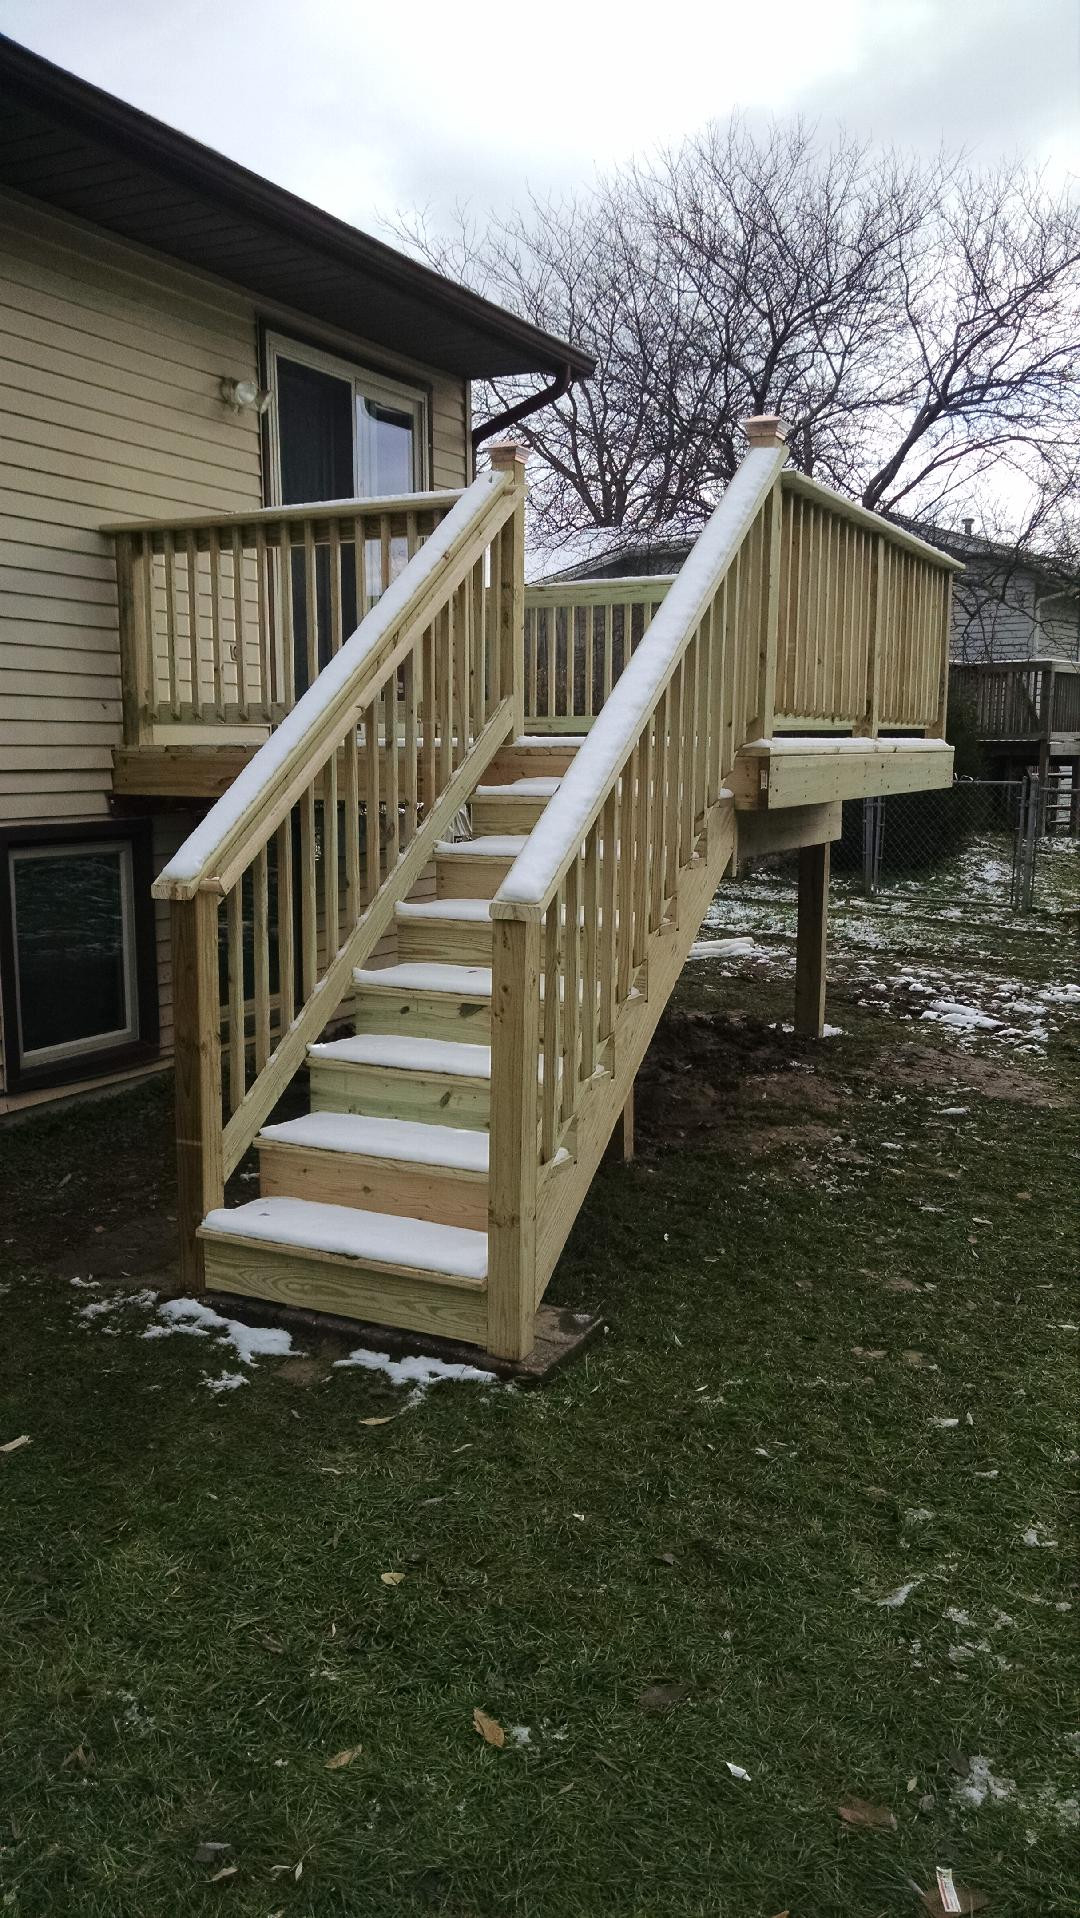 Best Deck Paint Review
 The 6 Best Deck Stain Reviews and Ratings